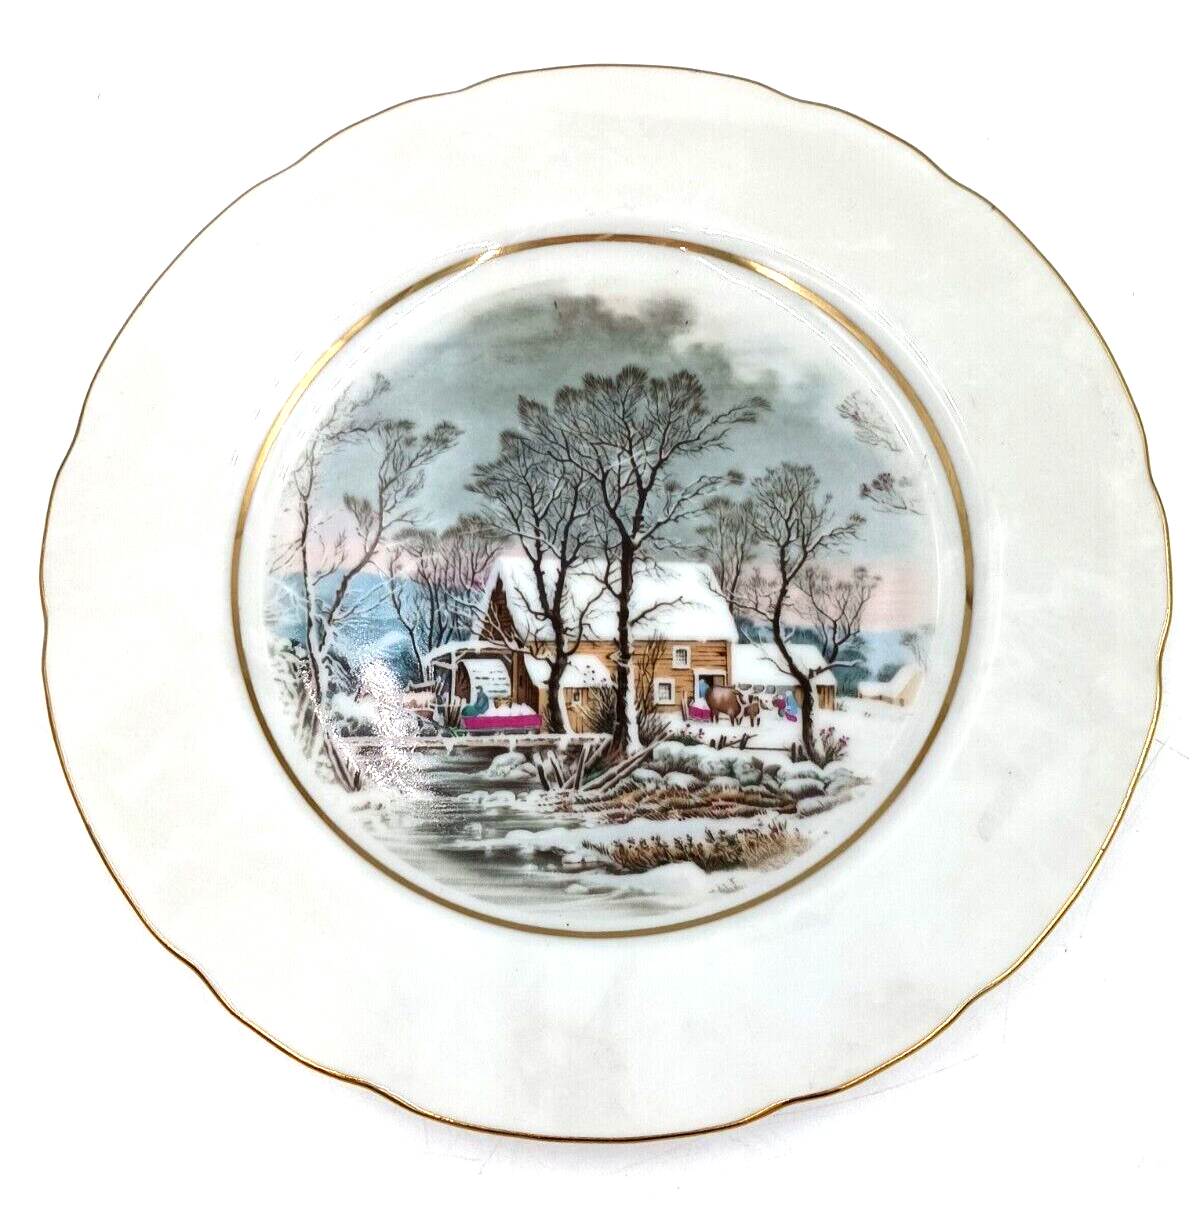 Vintage Avon Ceramic Plate of 1977 With Cityscape Pattern - $7.95